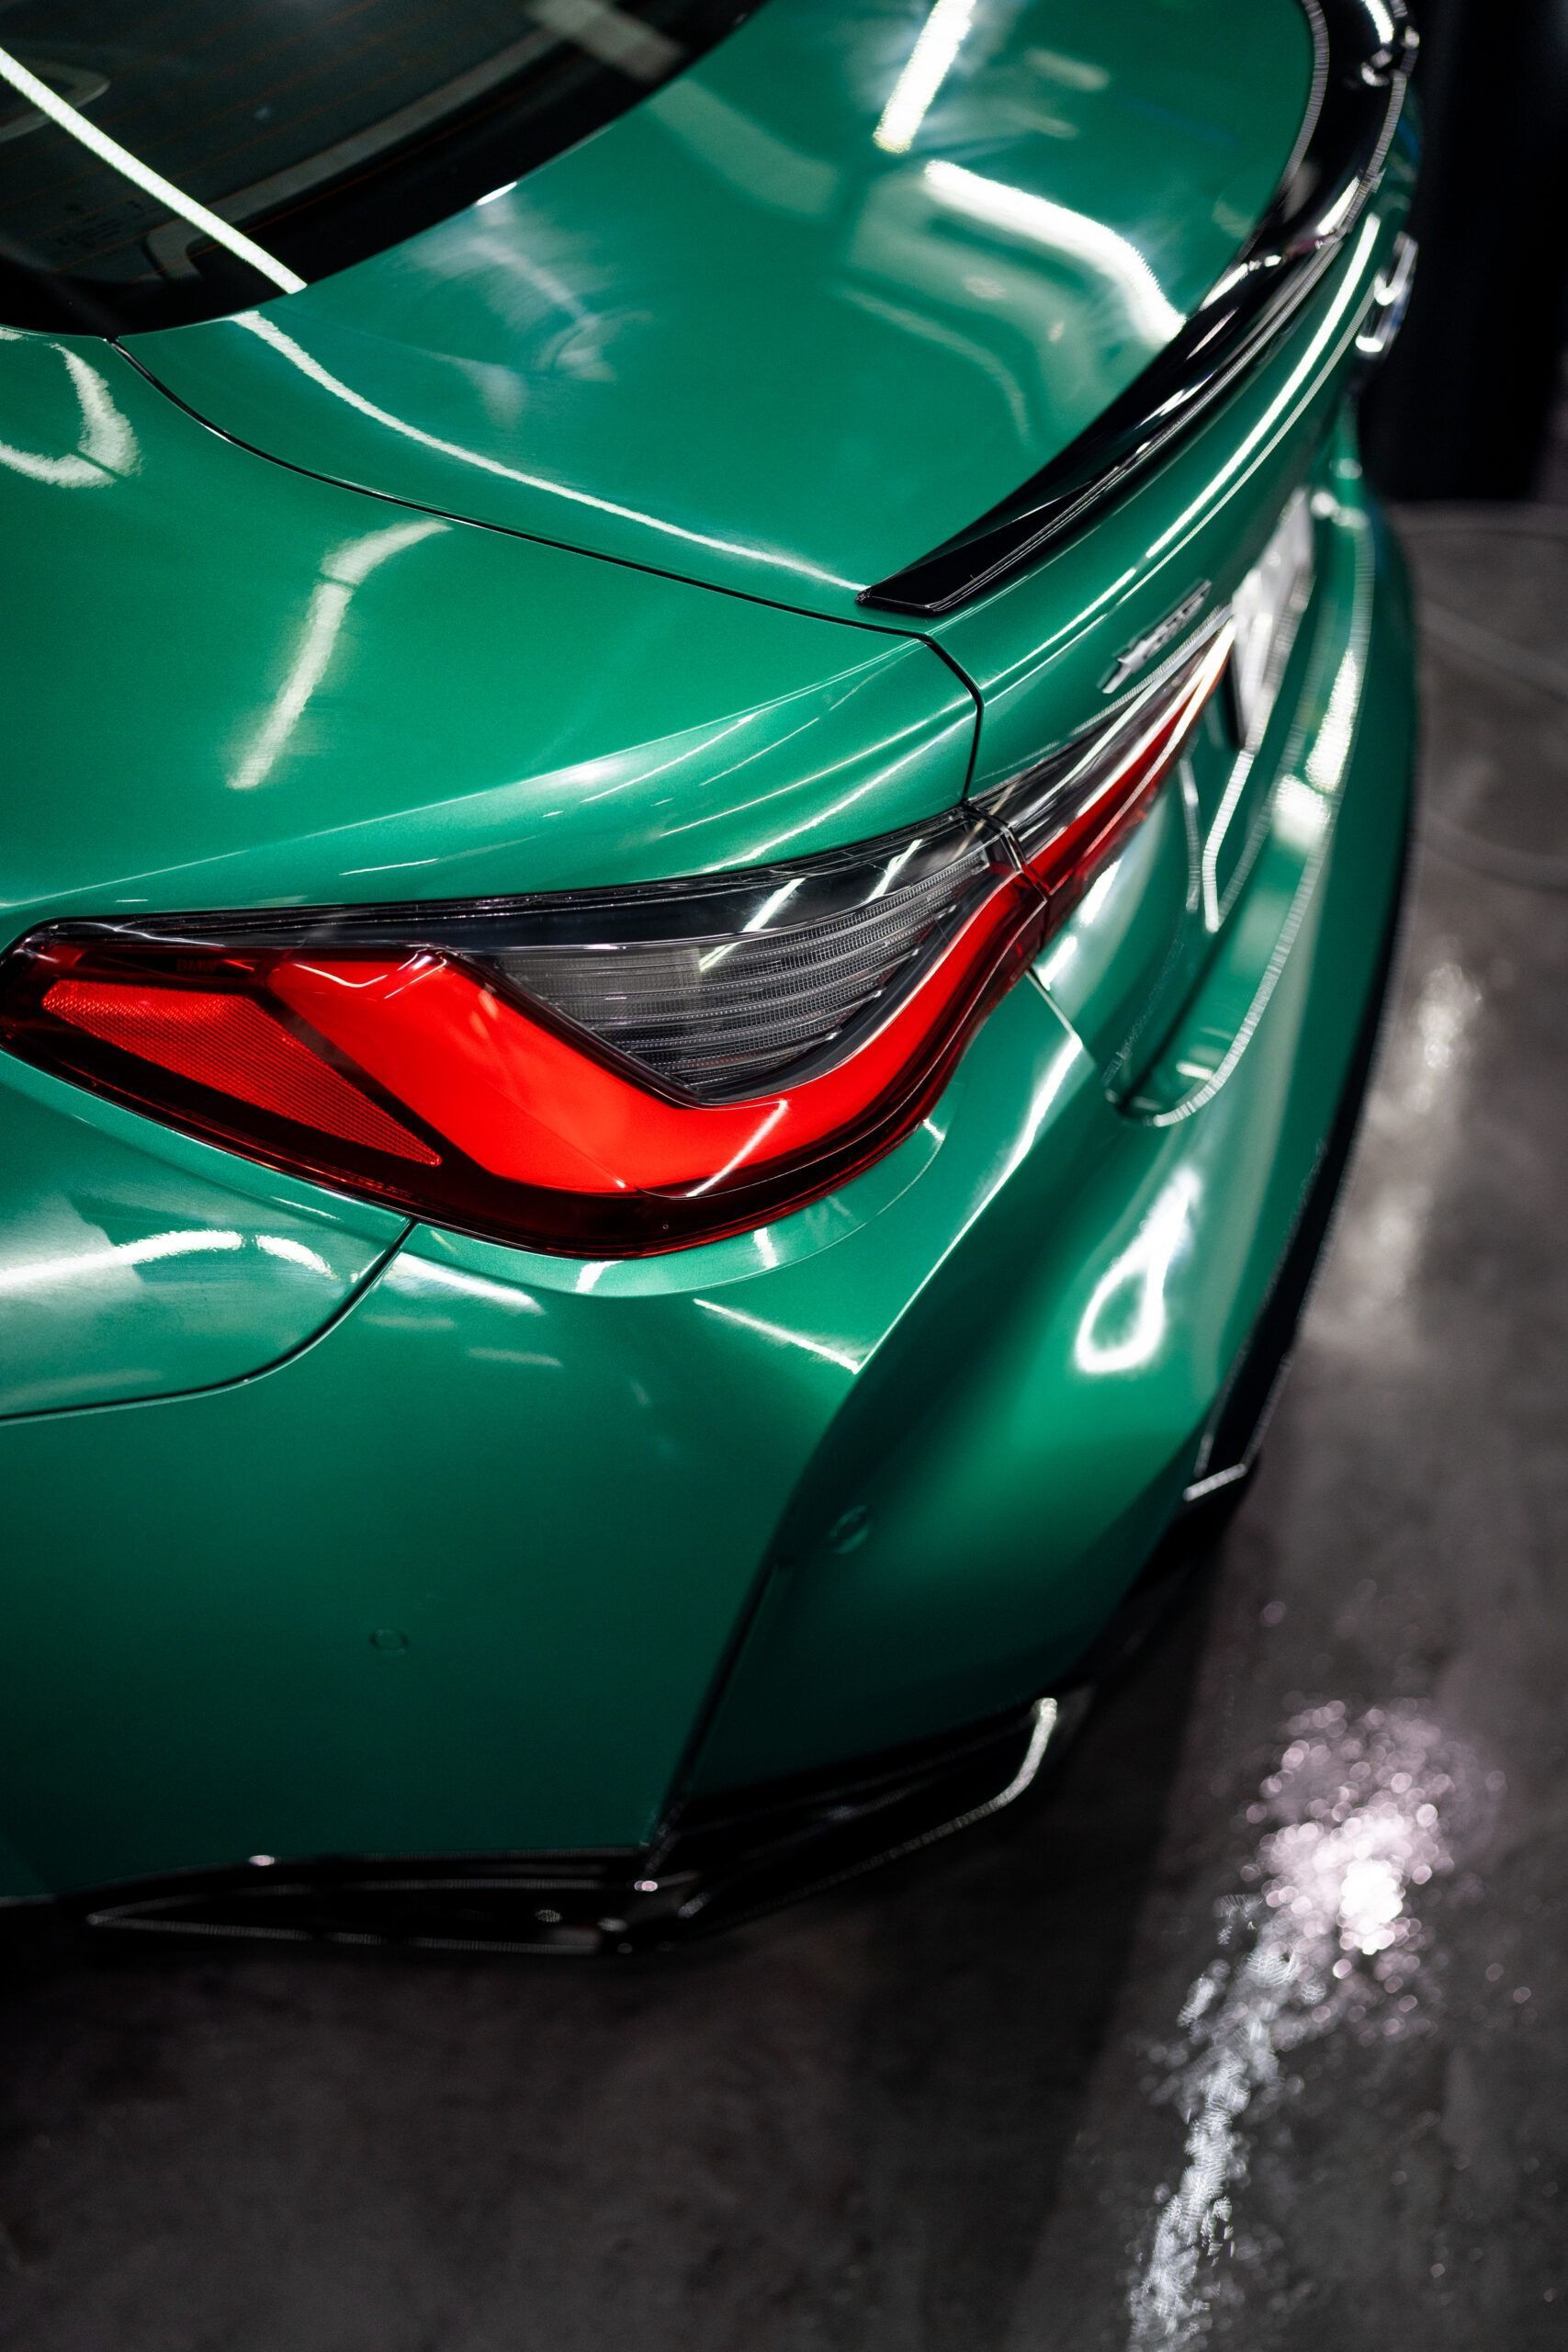 The rear end of a green bmw m4 is shown in a close up.